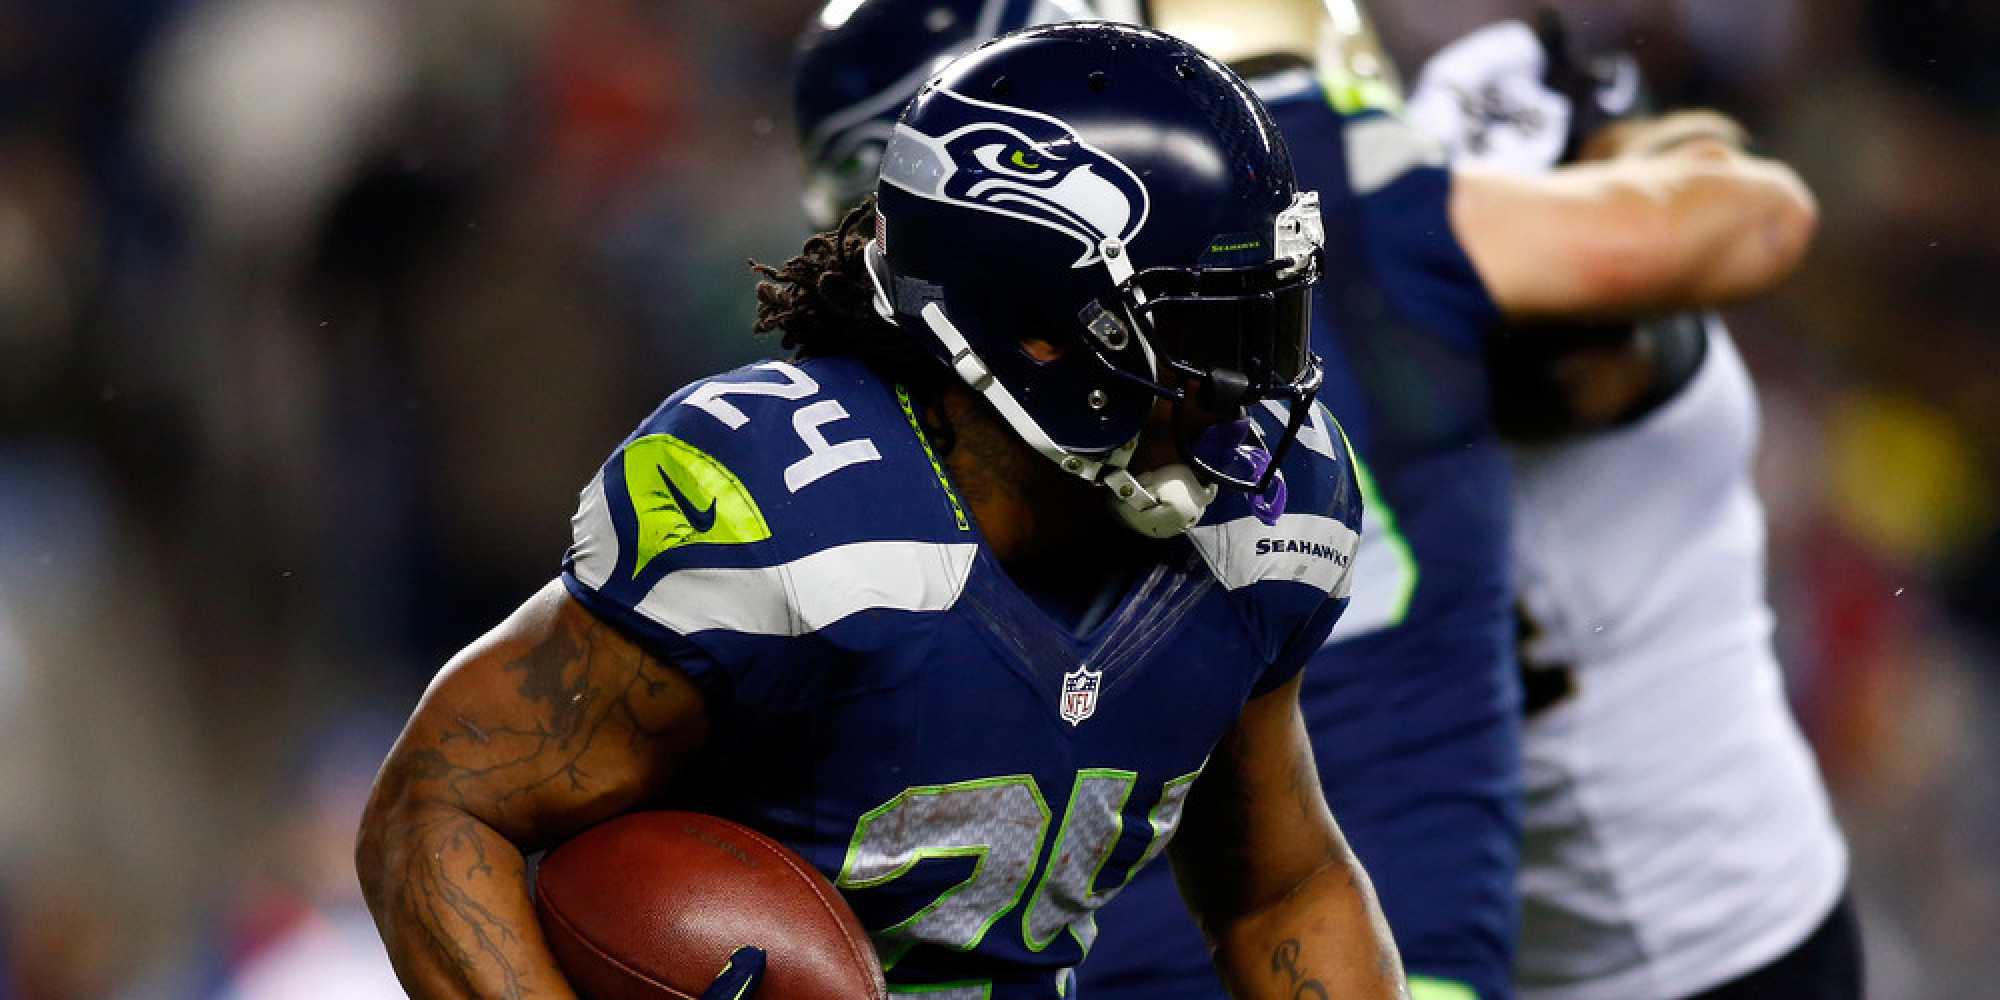  charged with making false statem Marshawn Lynch Beast Mode Wallpaper